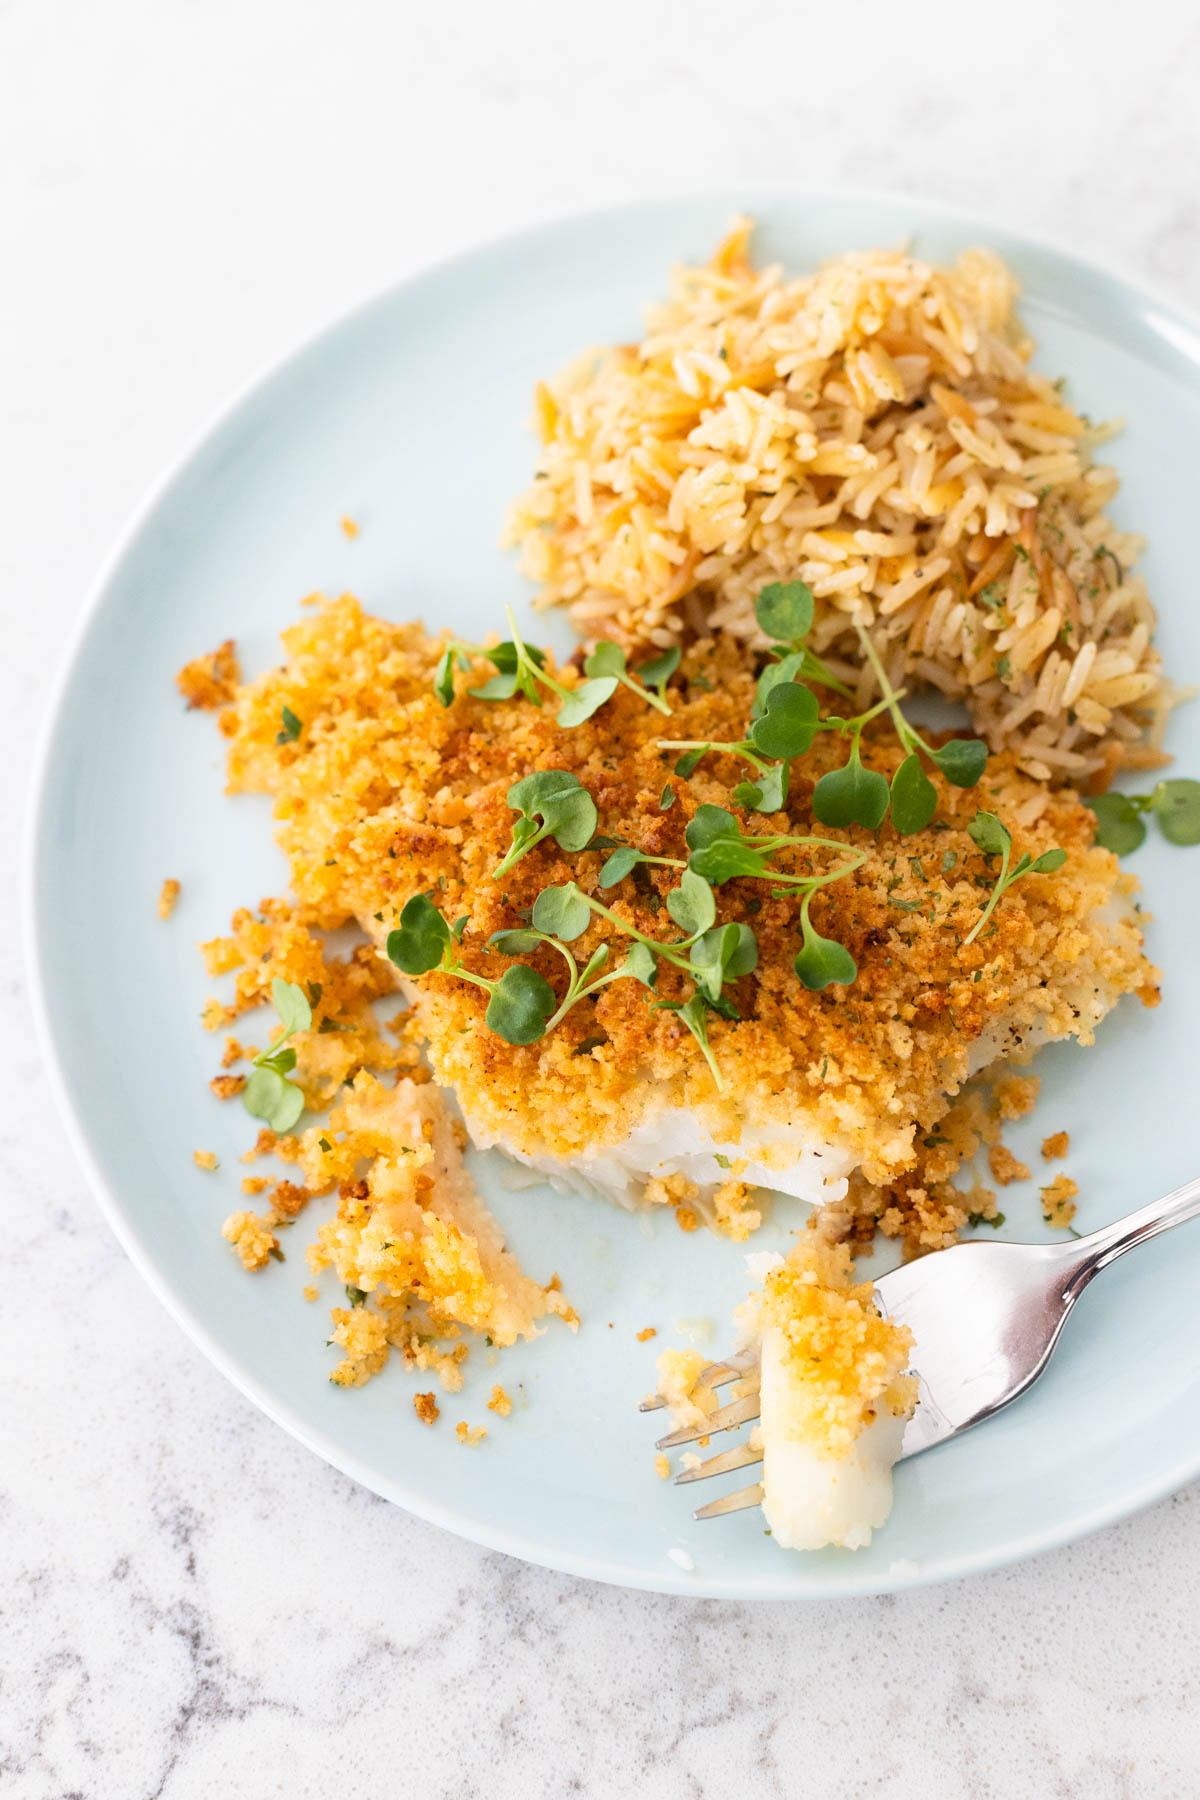 The crispy cod filet is on a blue plate with a scoop of rice pilaf.